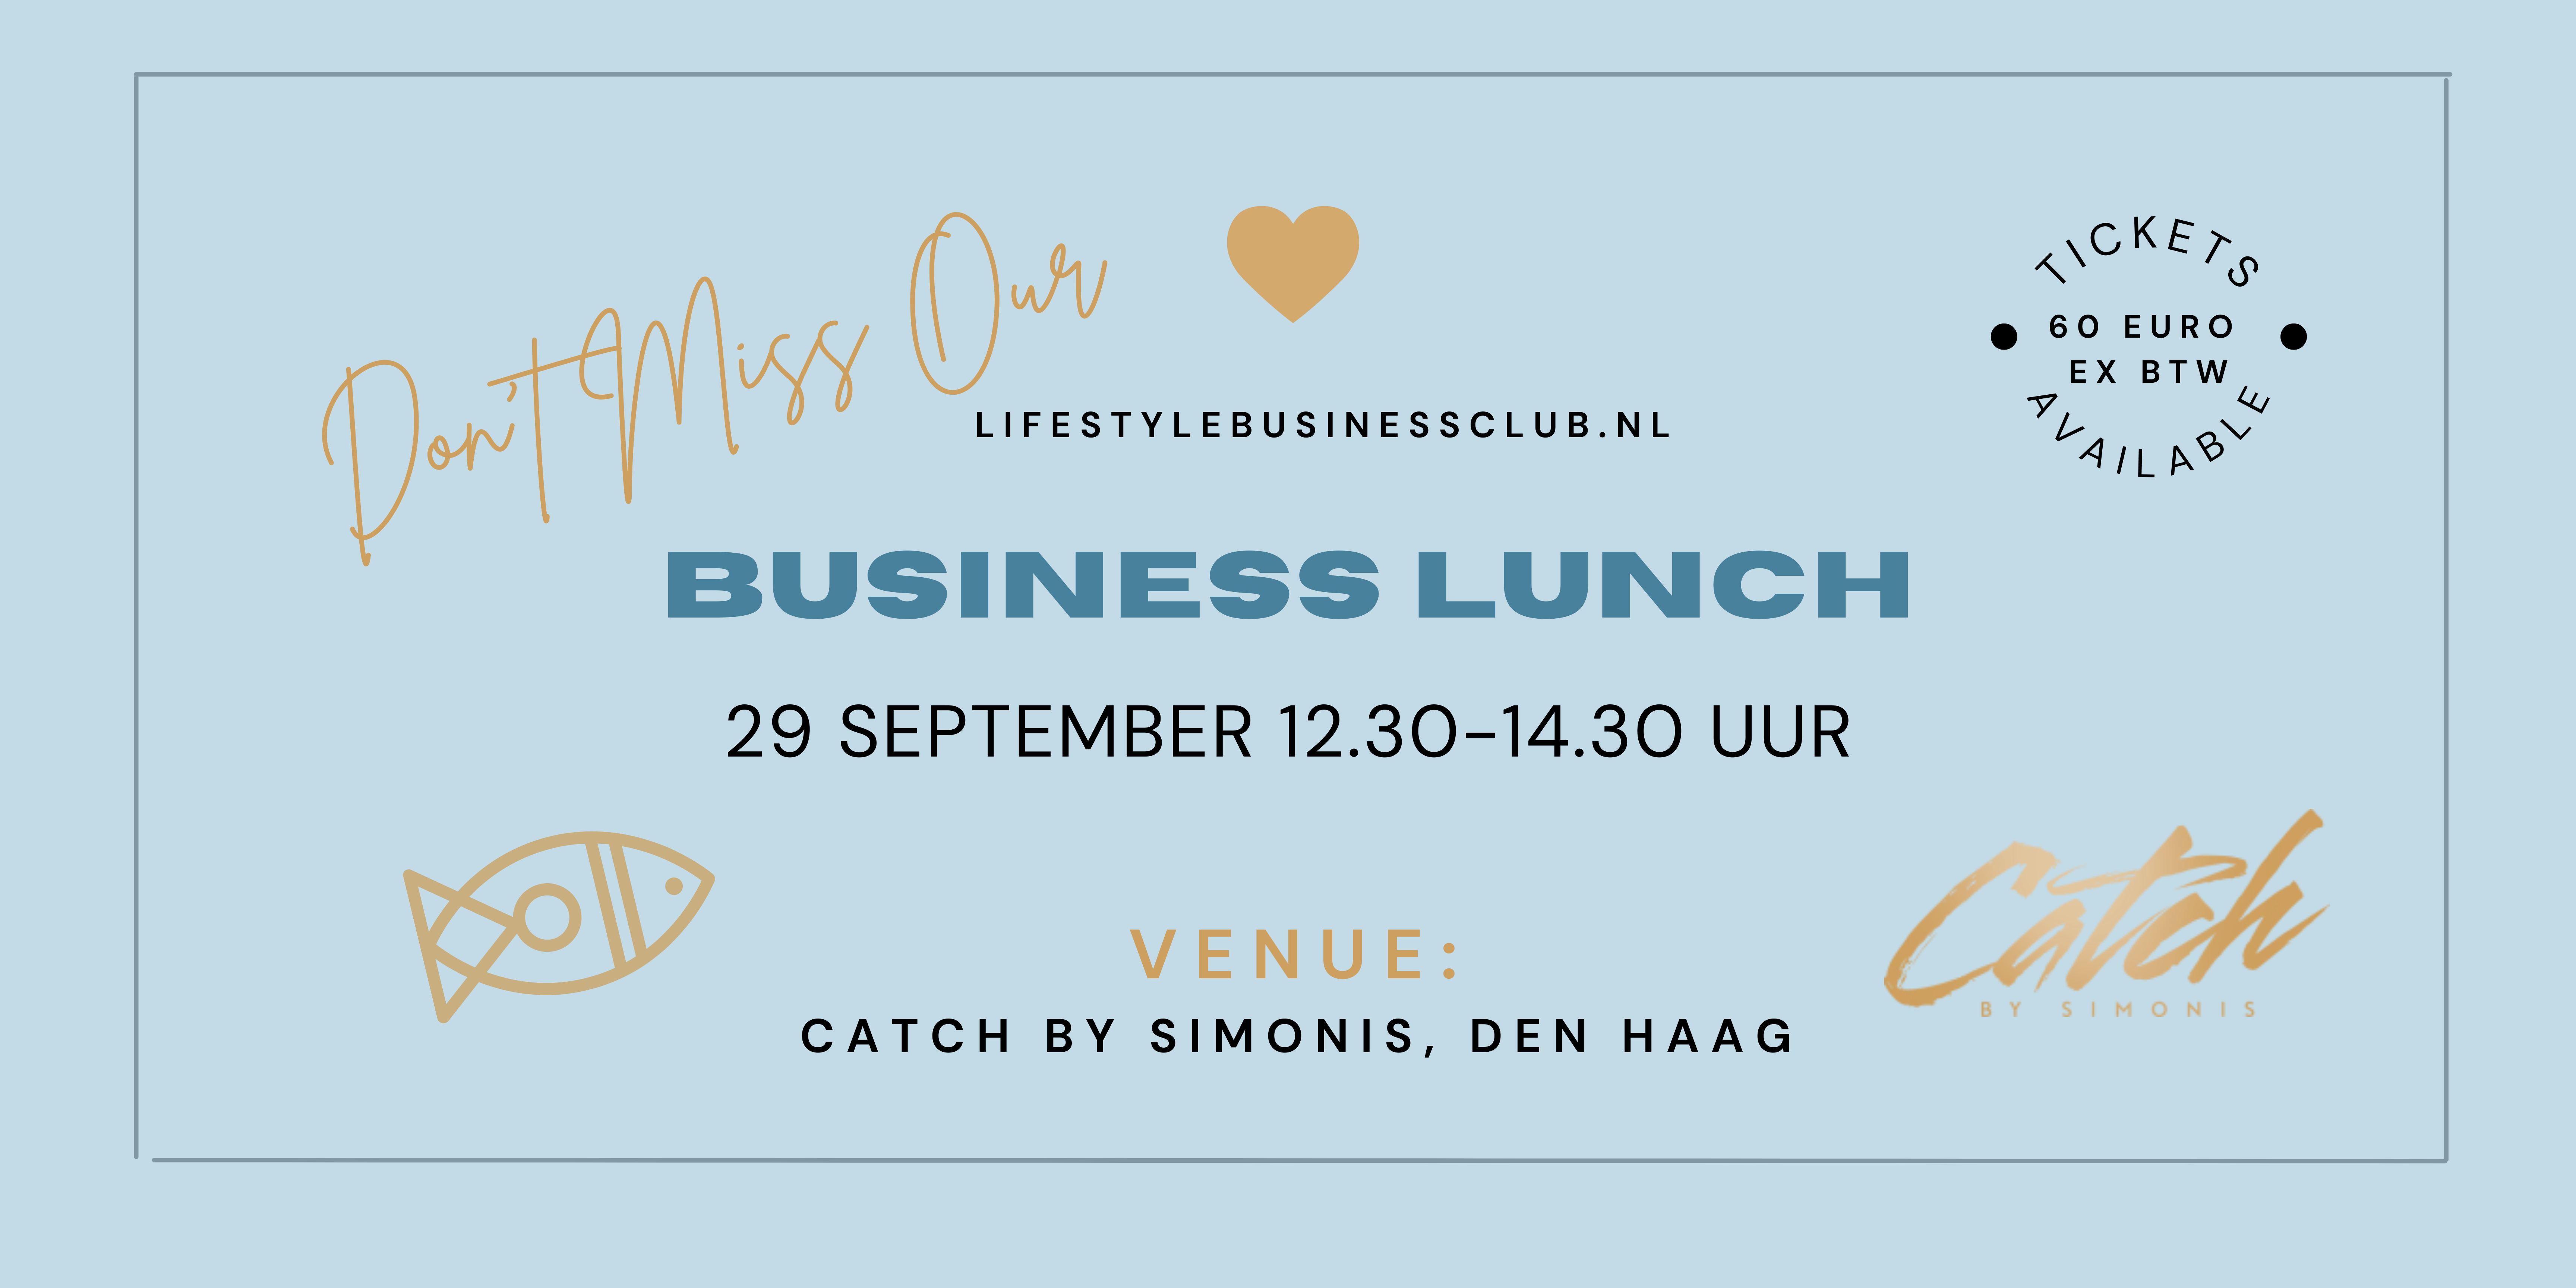 Lifestyle Business Lunch Catch by Simonis